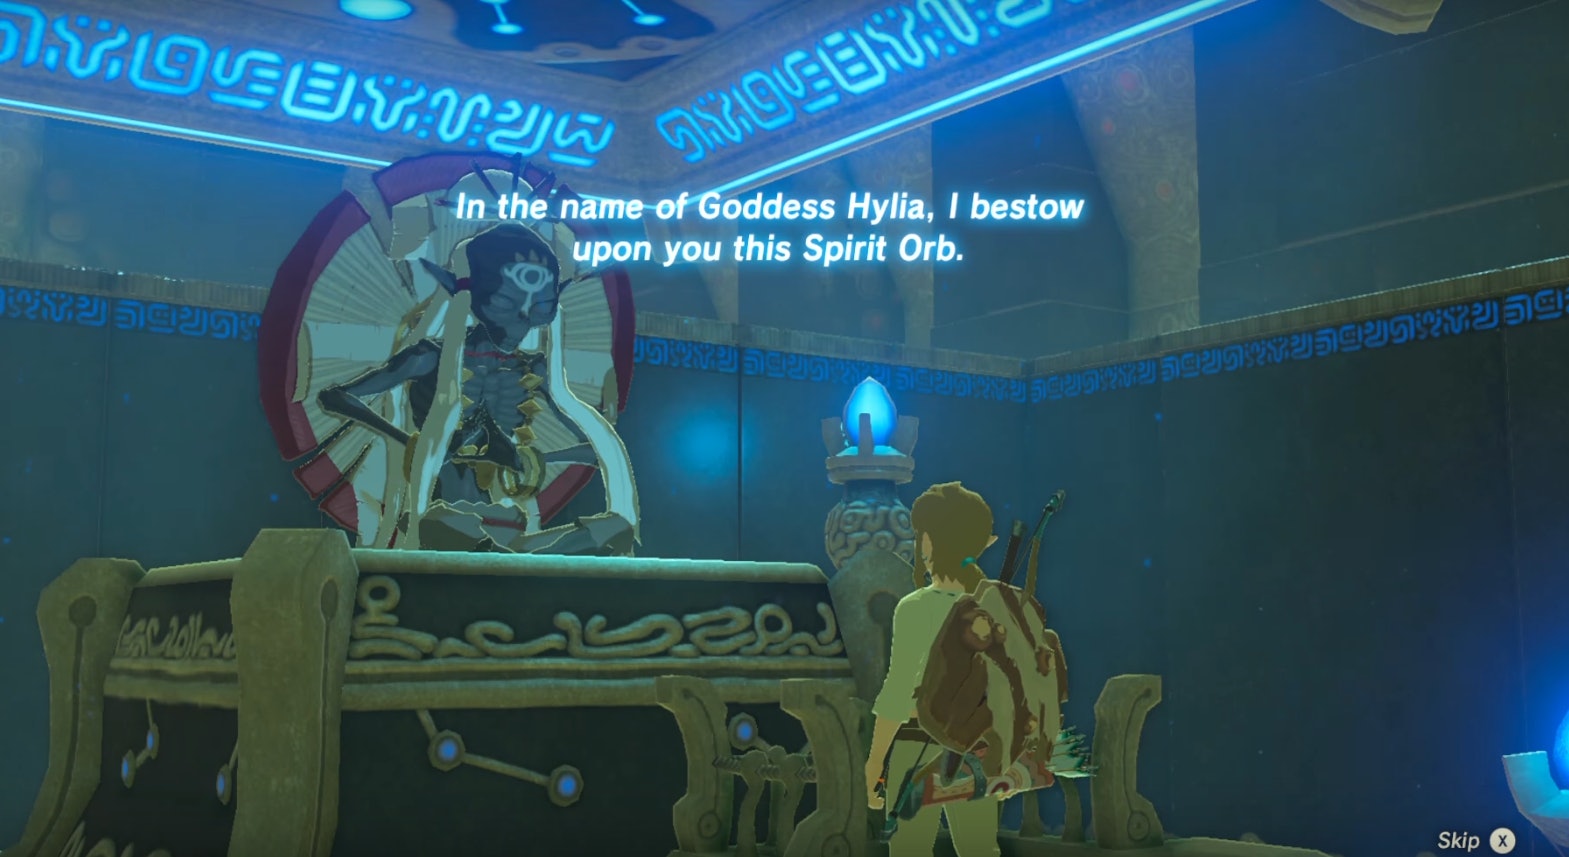 breath of the wild is it possible to max hearts and stamina